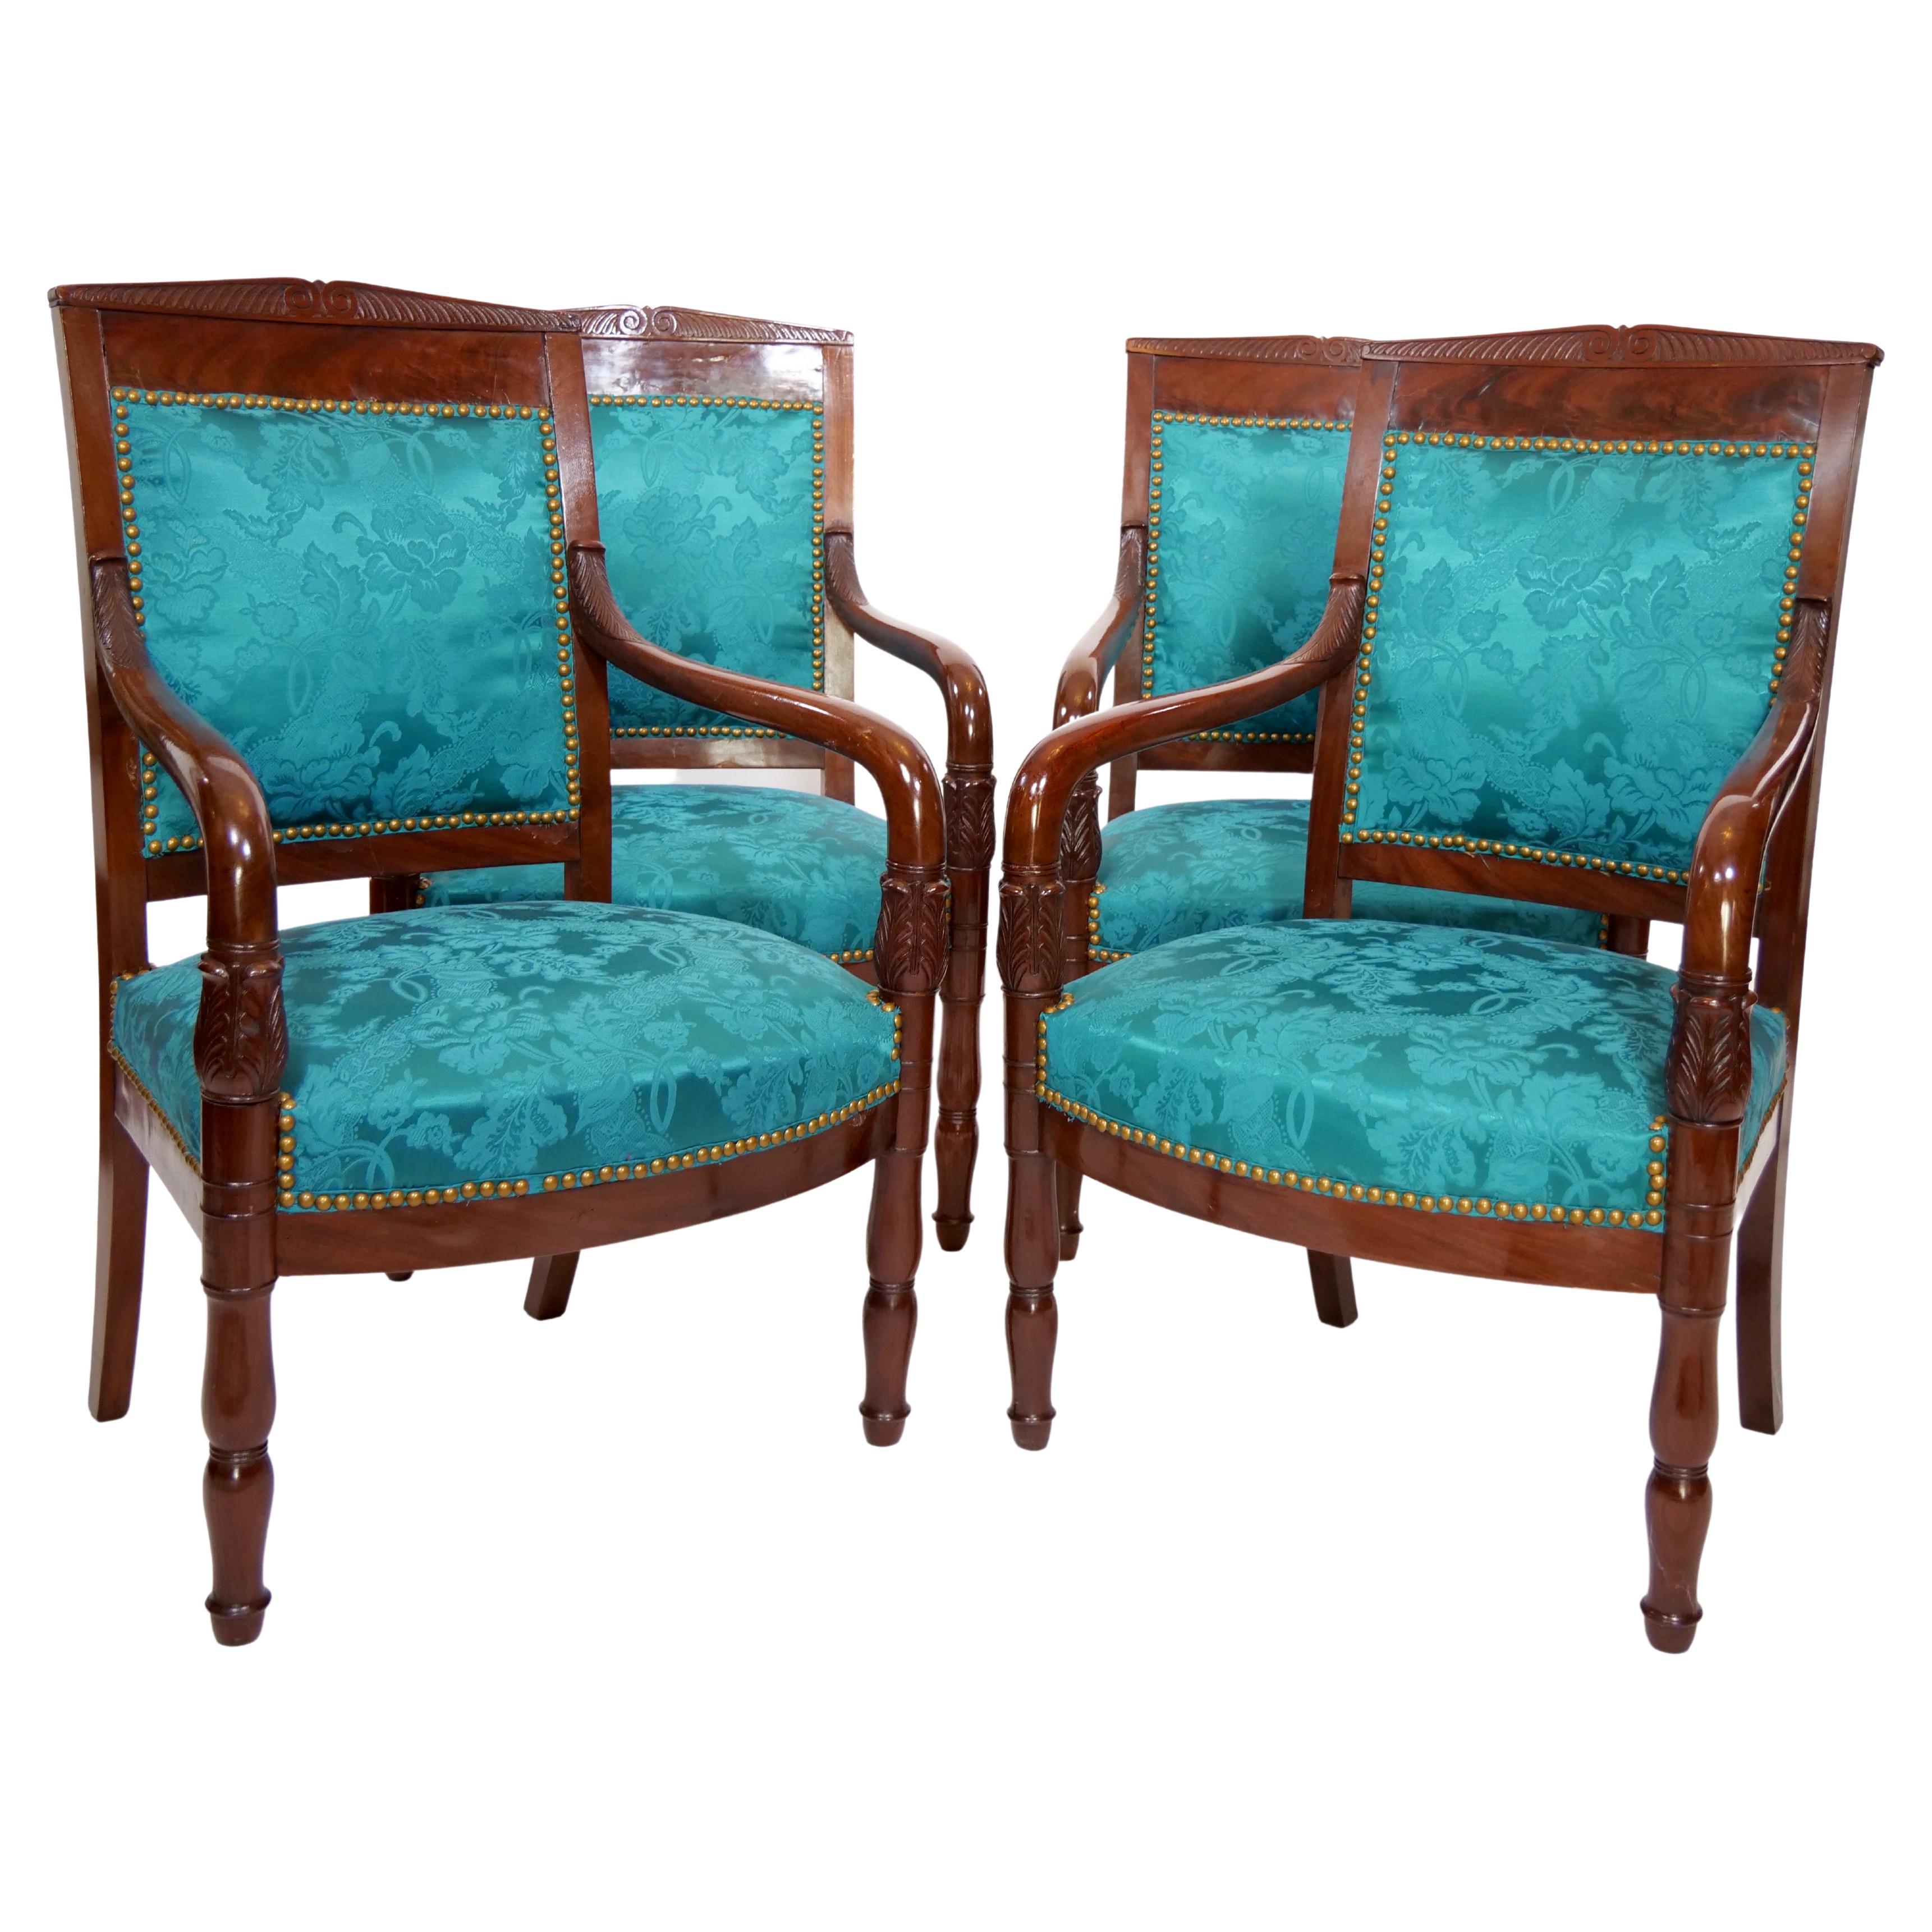 19th century Edwardian style mahogany wood framed upholstered armchair set of four pieces. Each chair is in great antique condition. Signed and dated underneath by the maker. Immaculate upholstery. Minor wear consistent with age / use. Each armchair